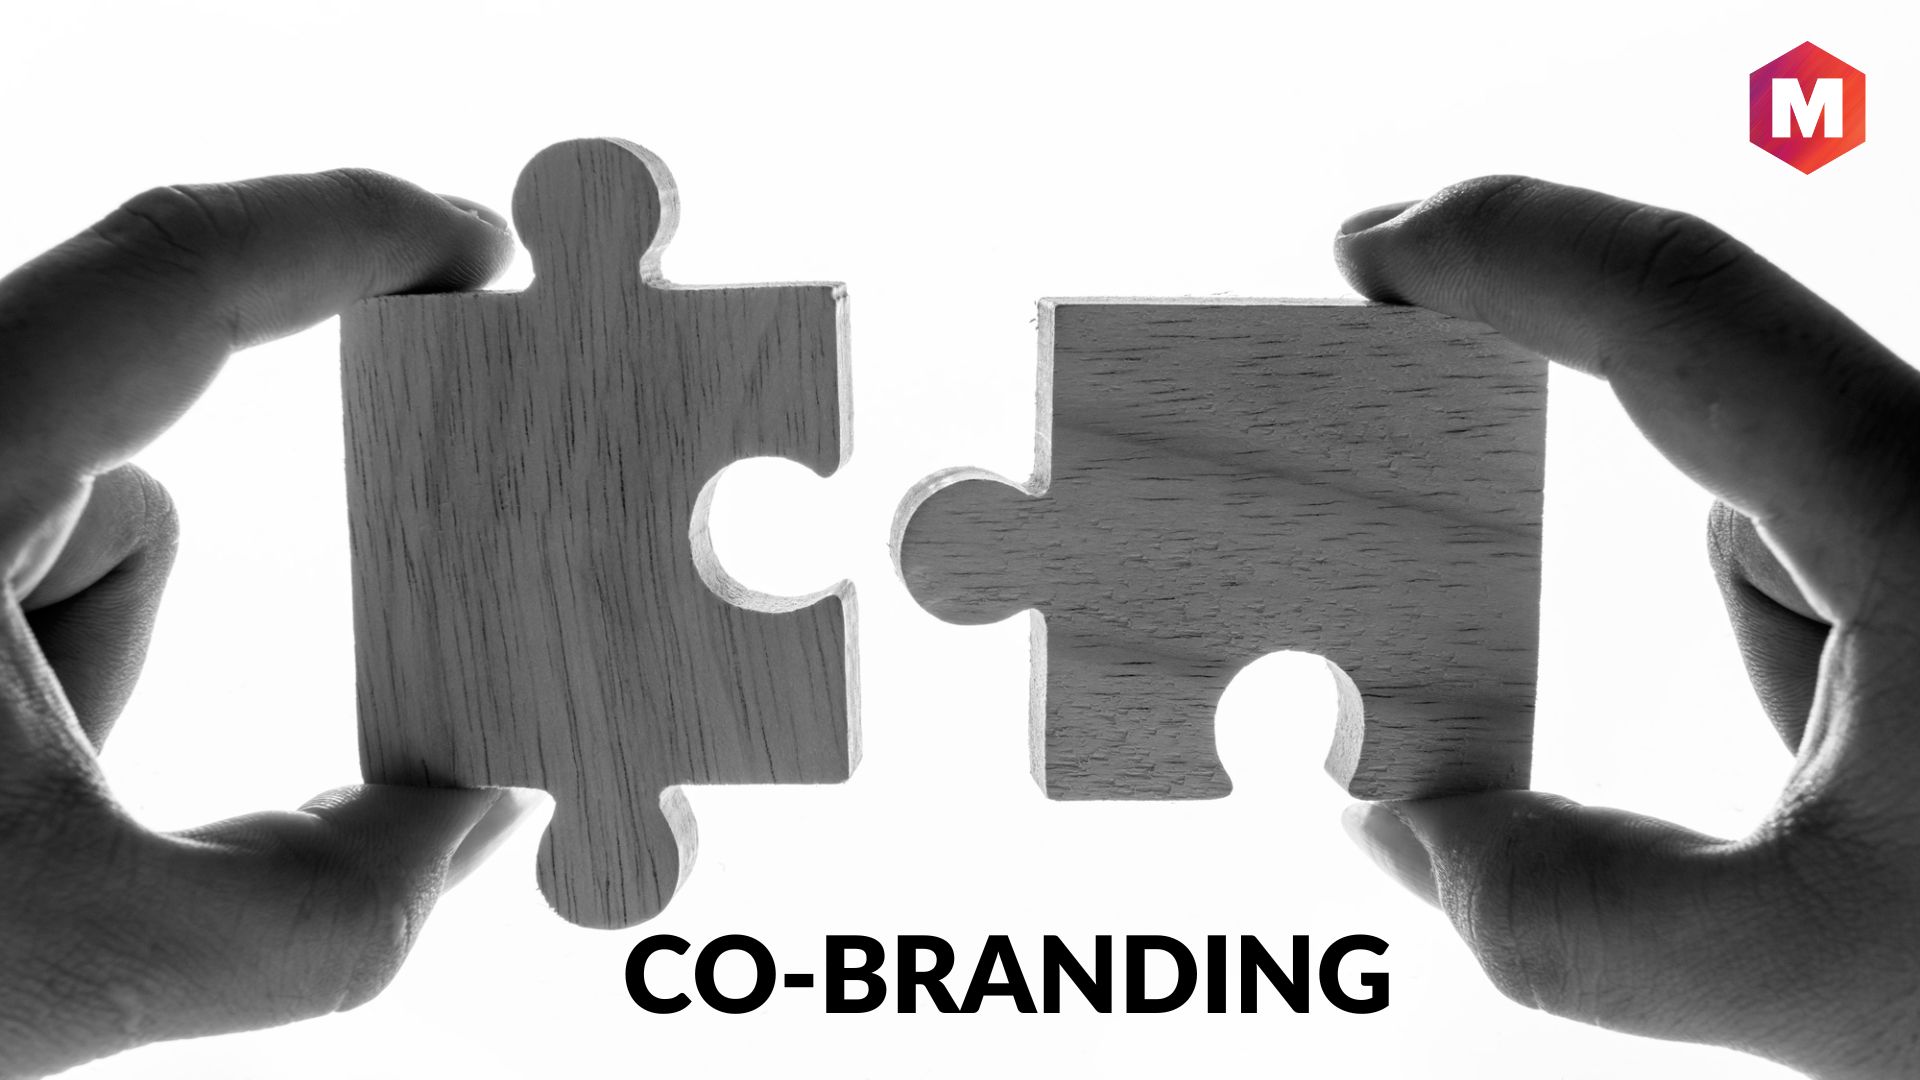 CoBranding Definition, Uses and Examples